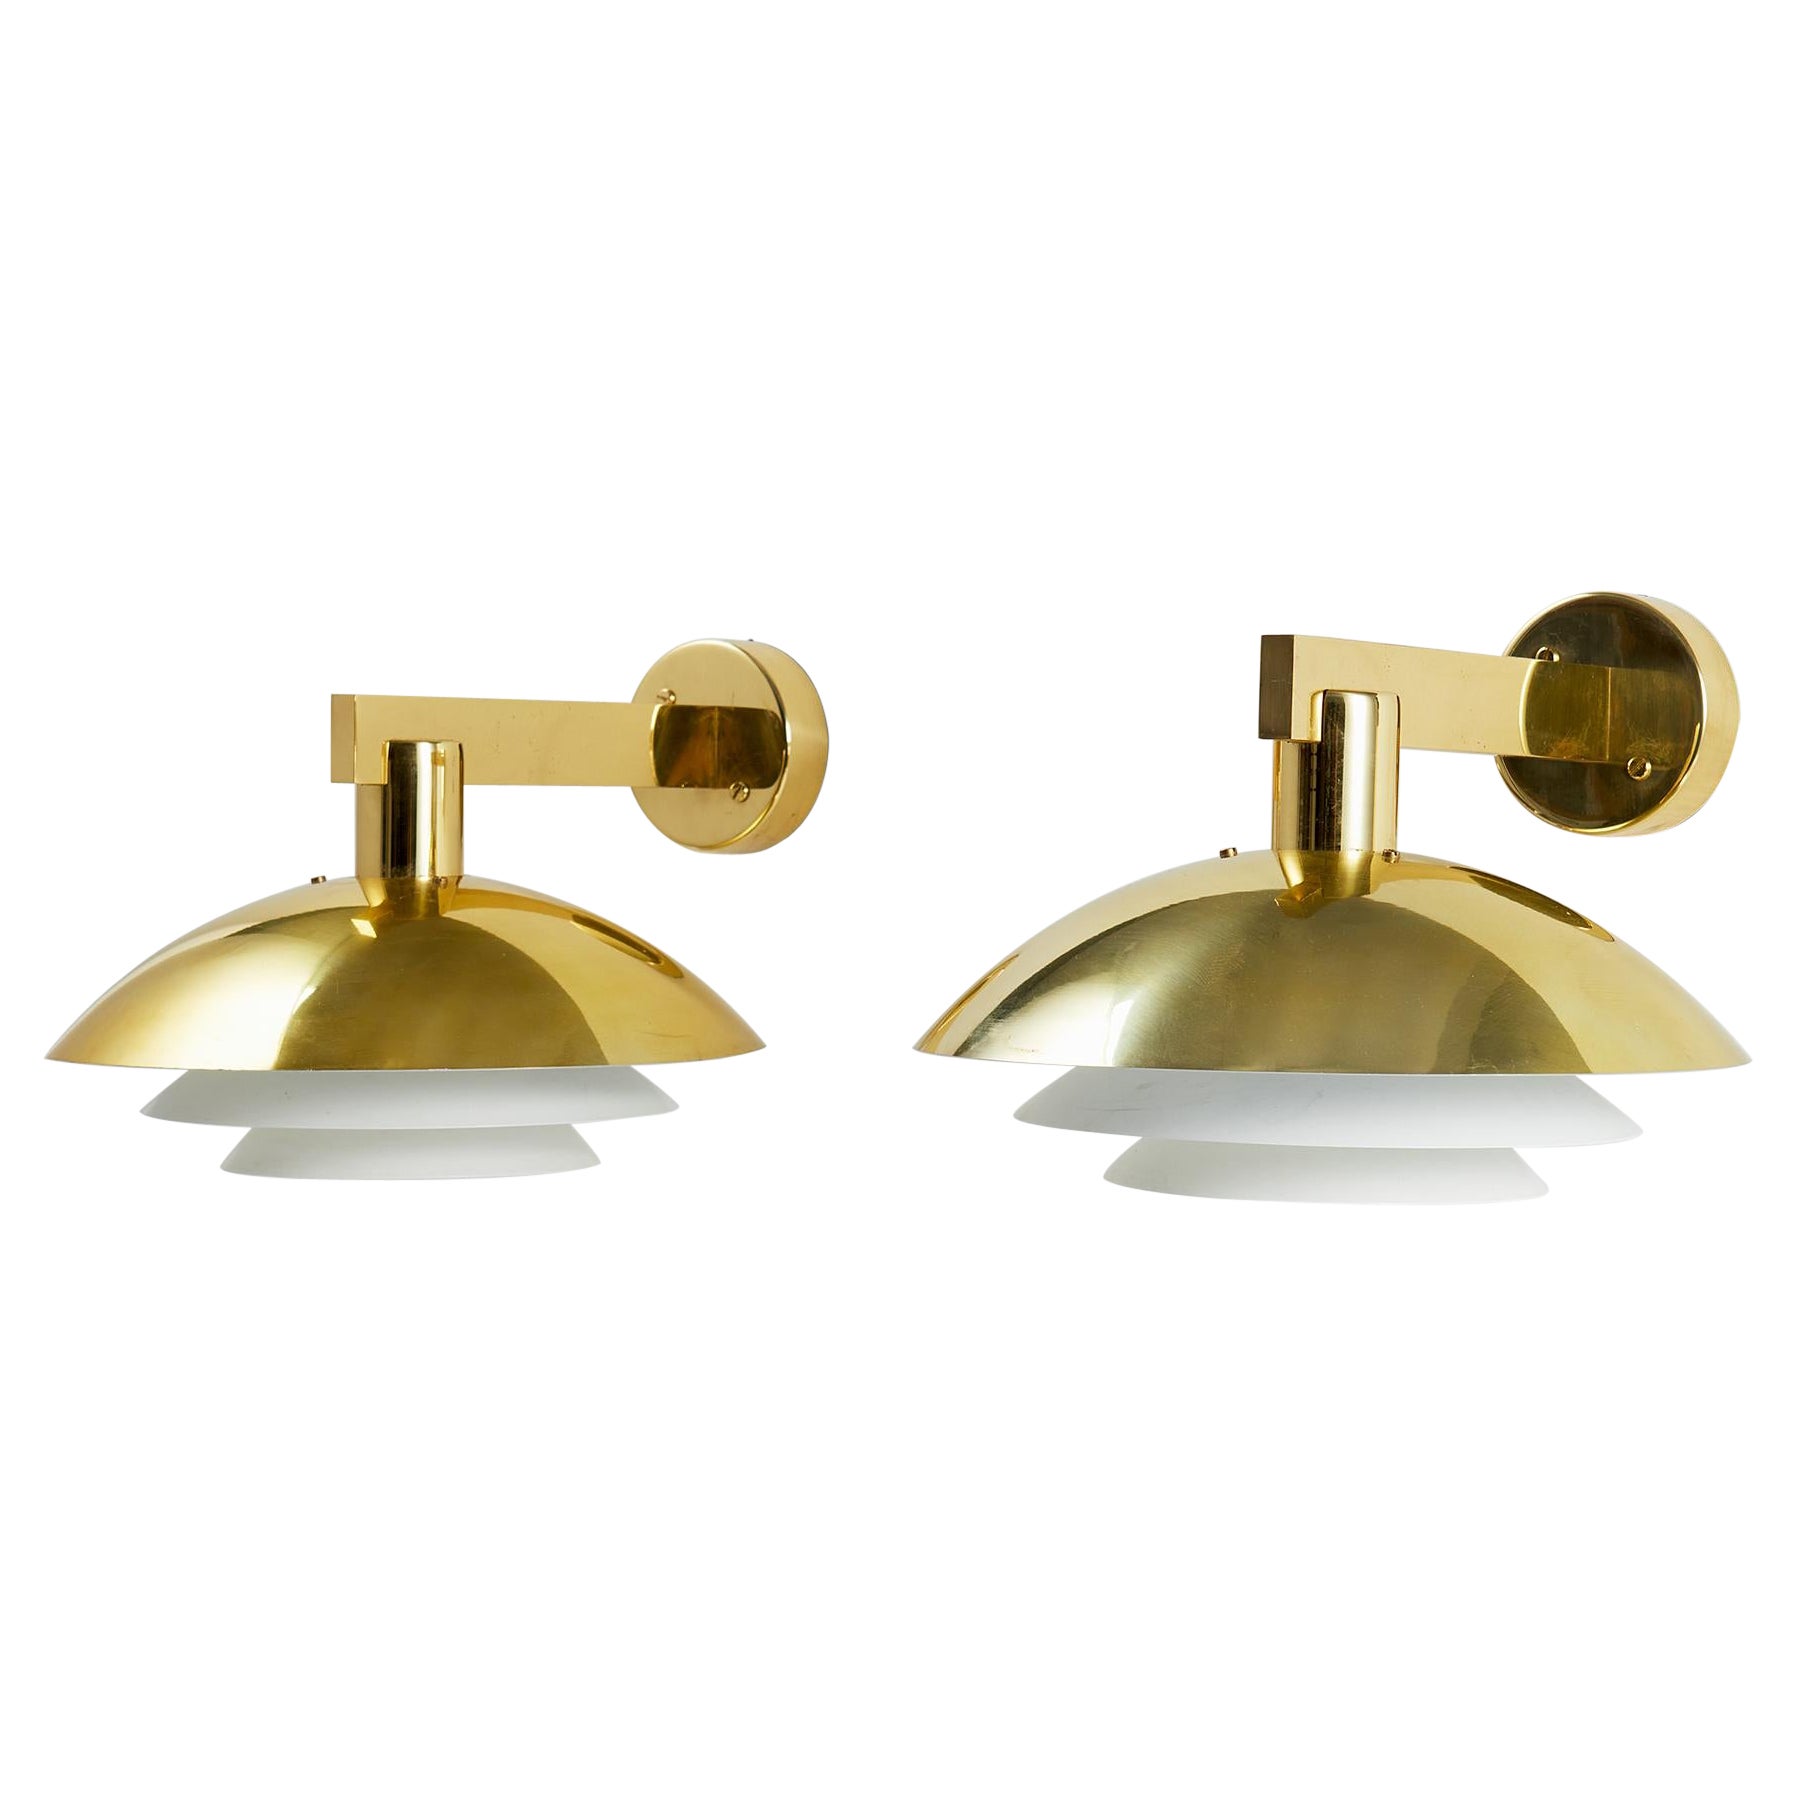 Pair of Wall Lights Designed by Hans-Agne Jakobsson, Sweden, 1960s For Sale